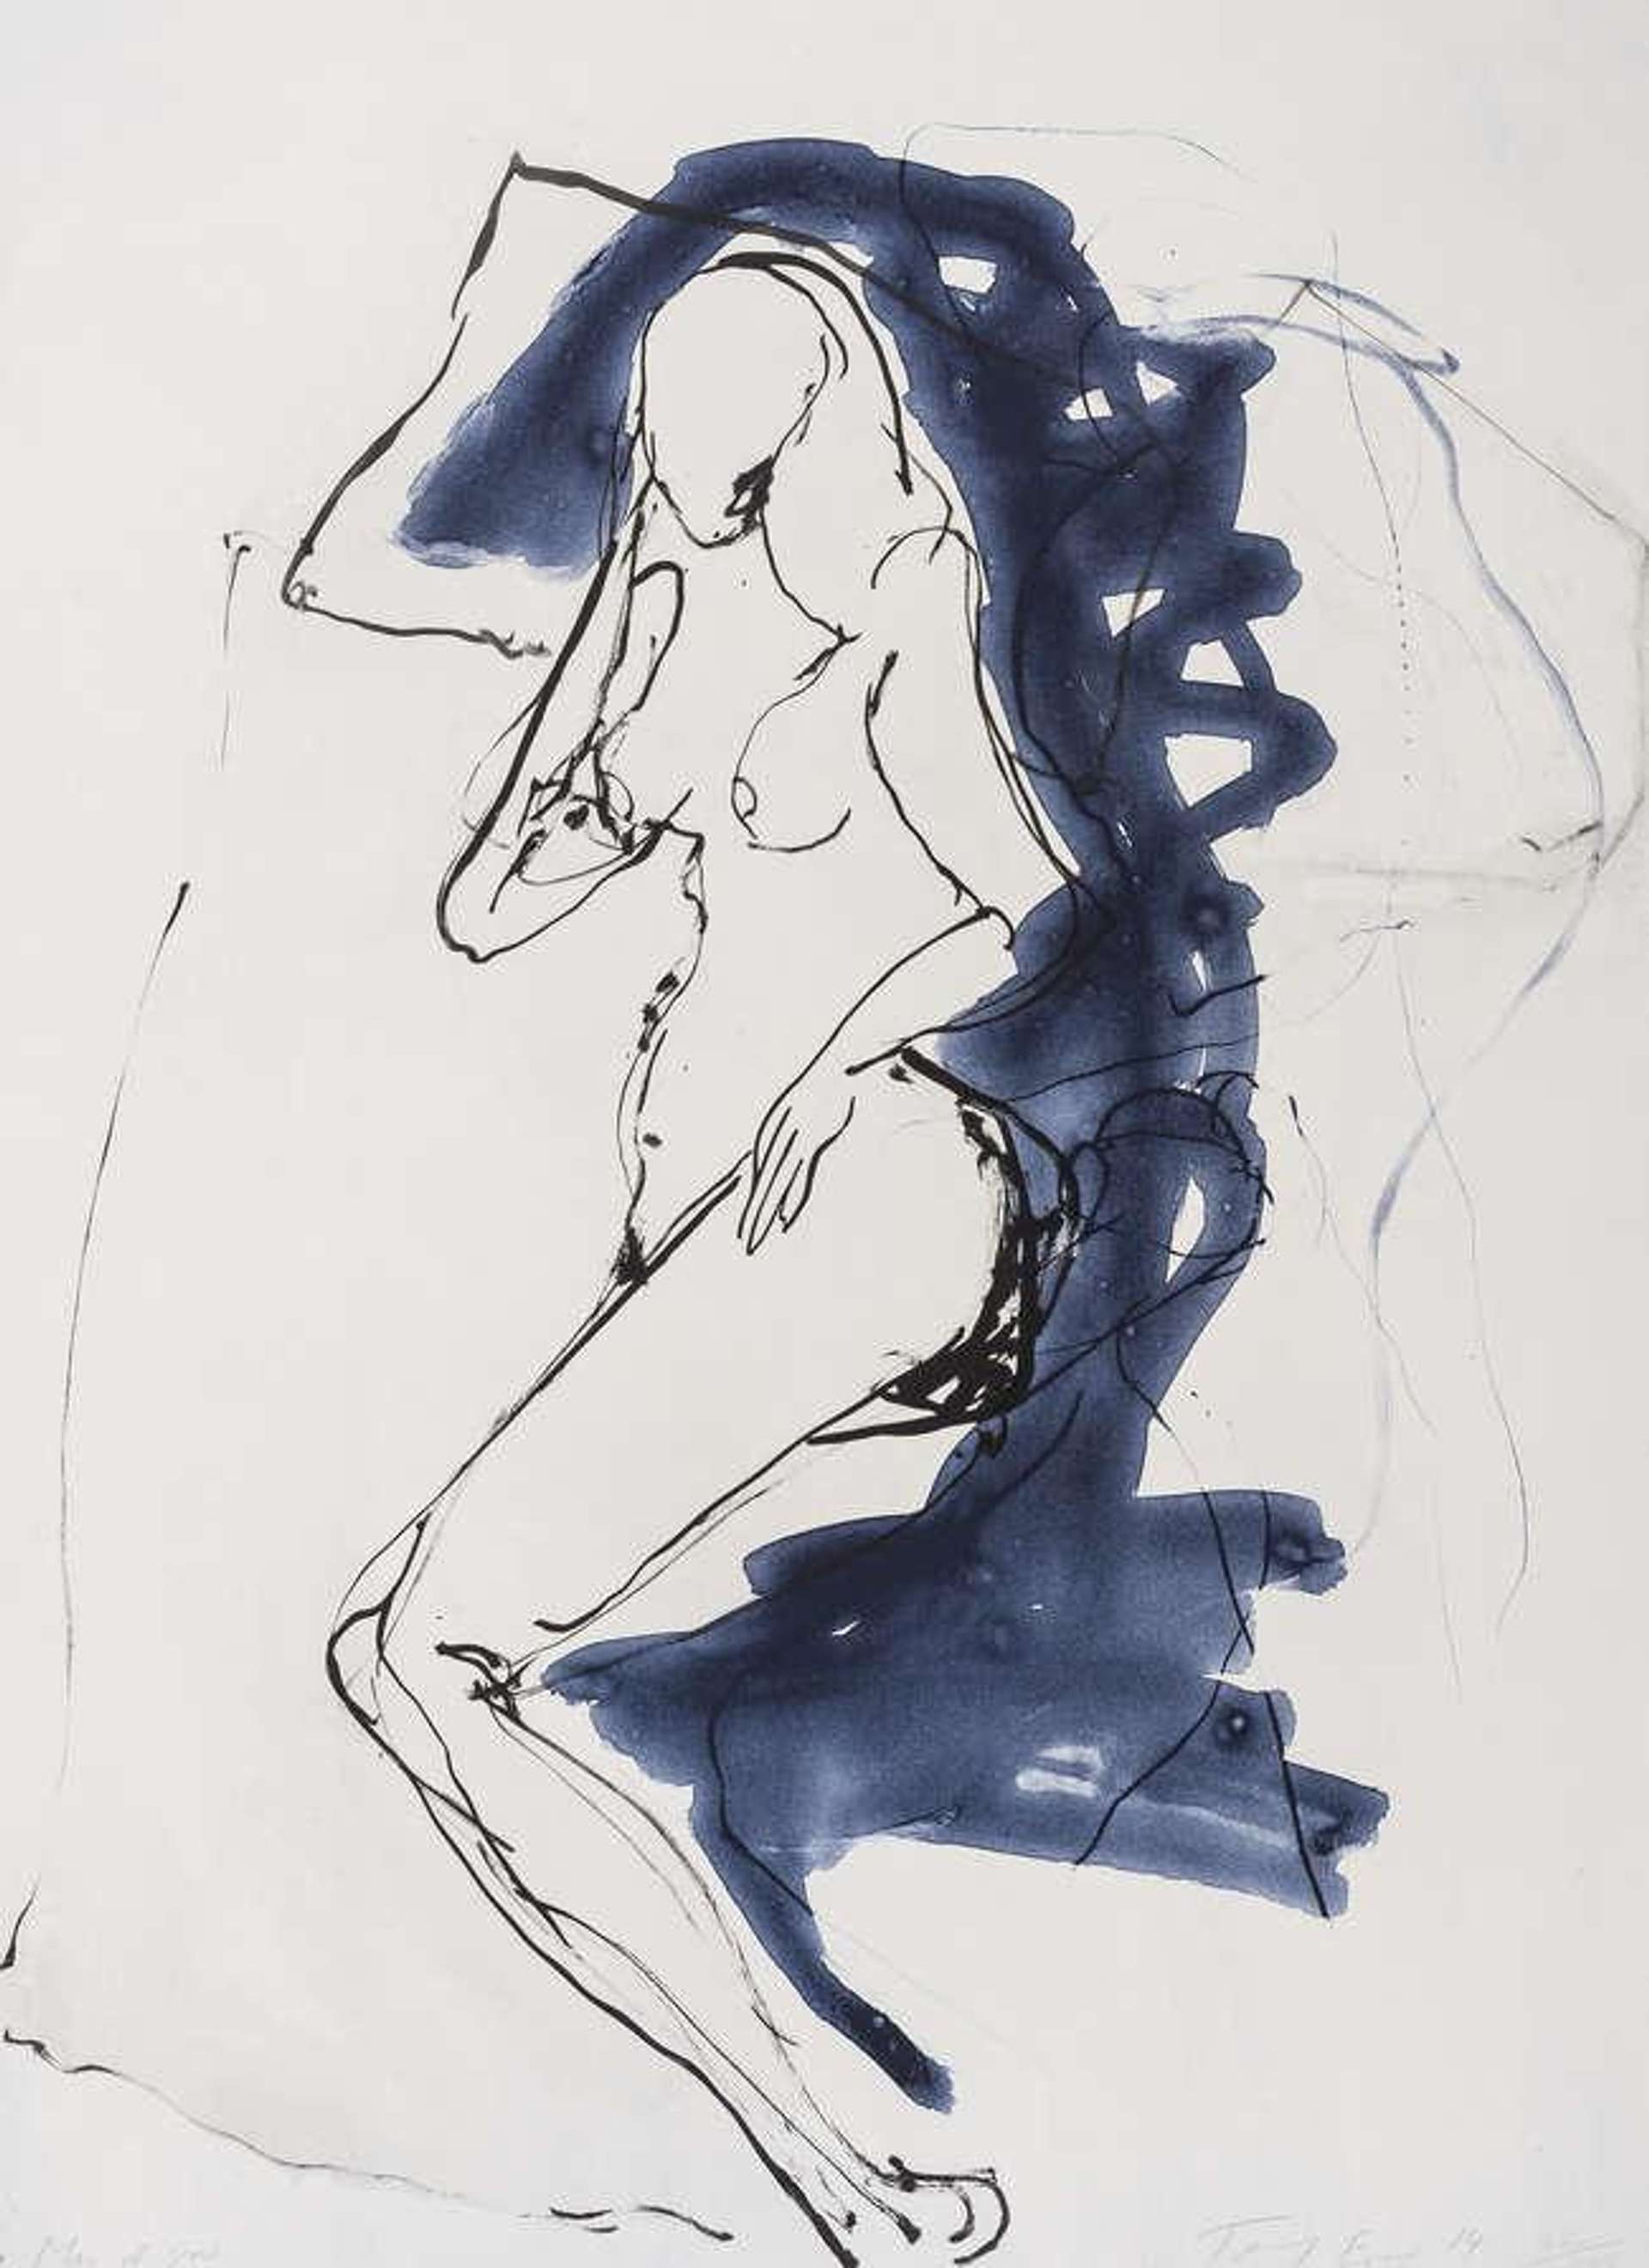 More Of You © Tracey Emin 2014